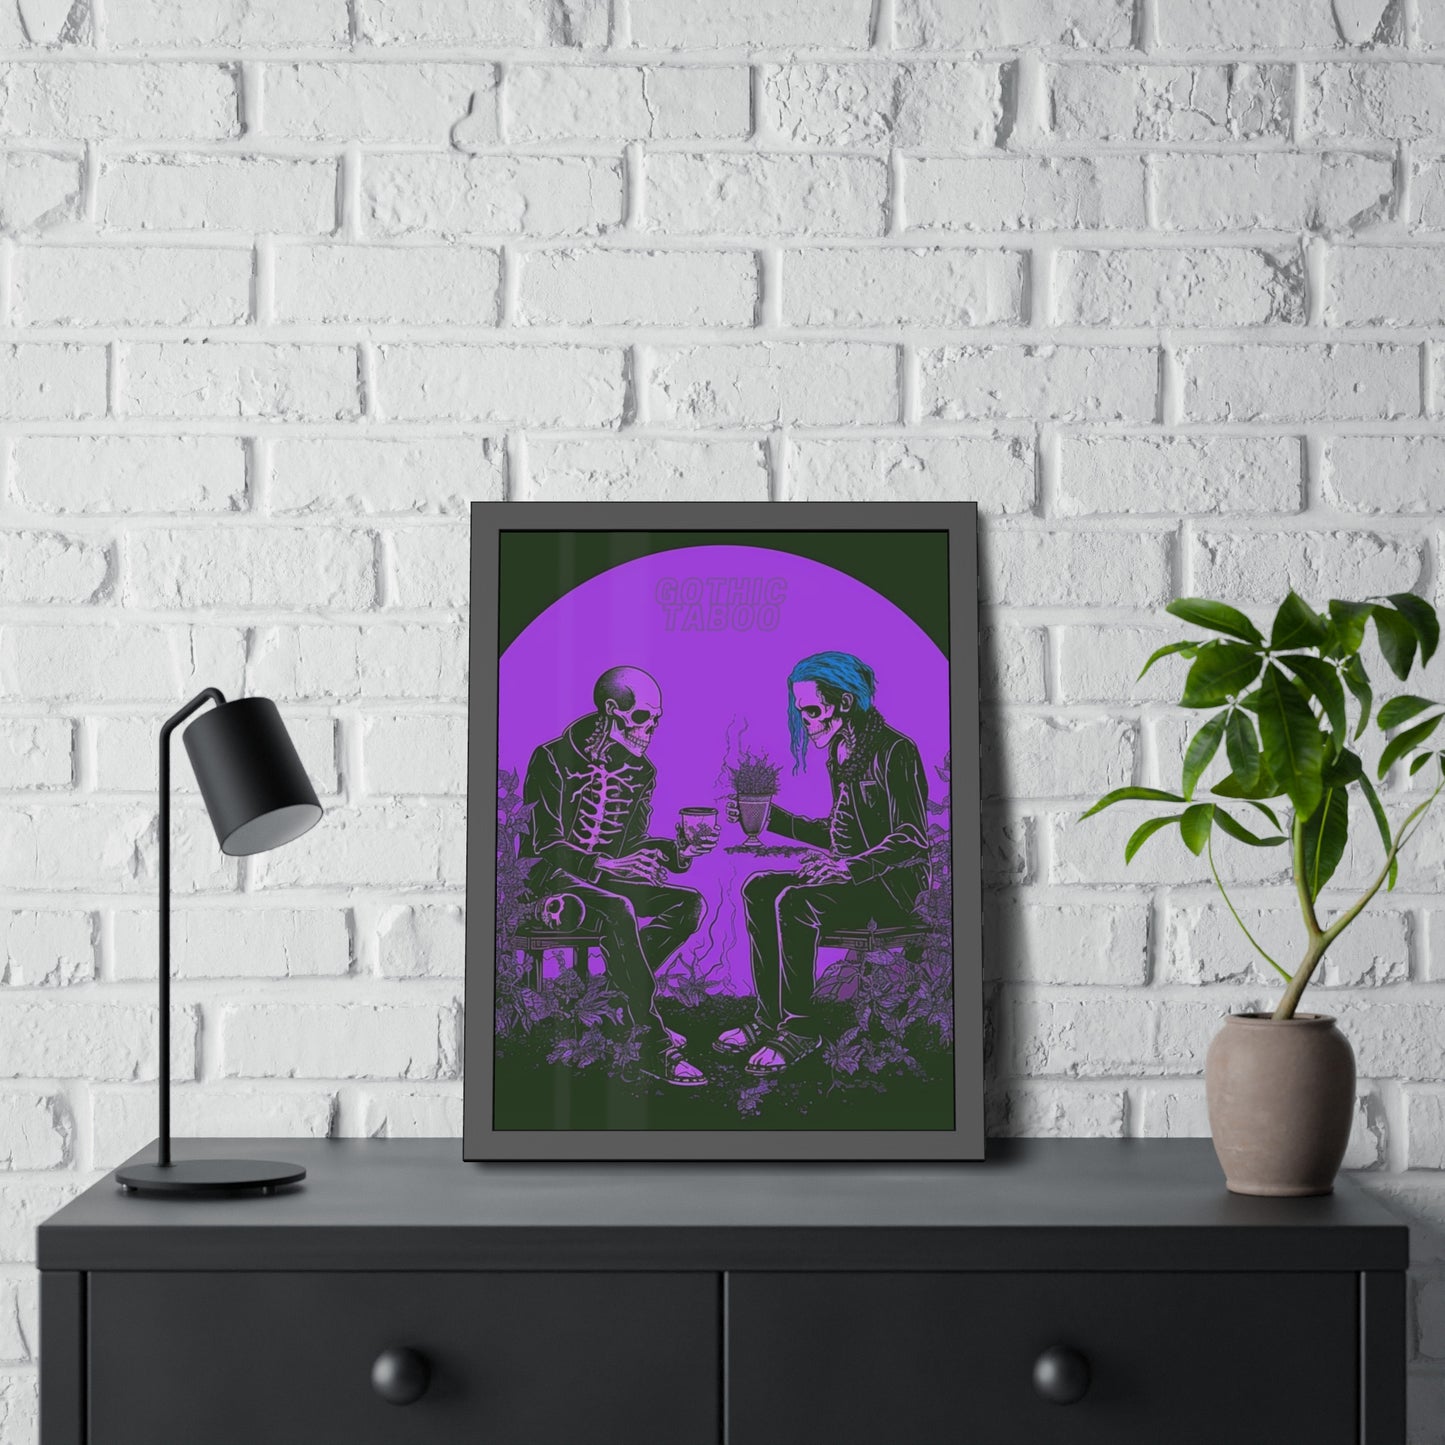 Tea with Friends framed paper poster